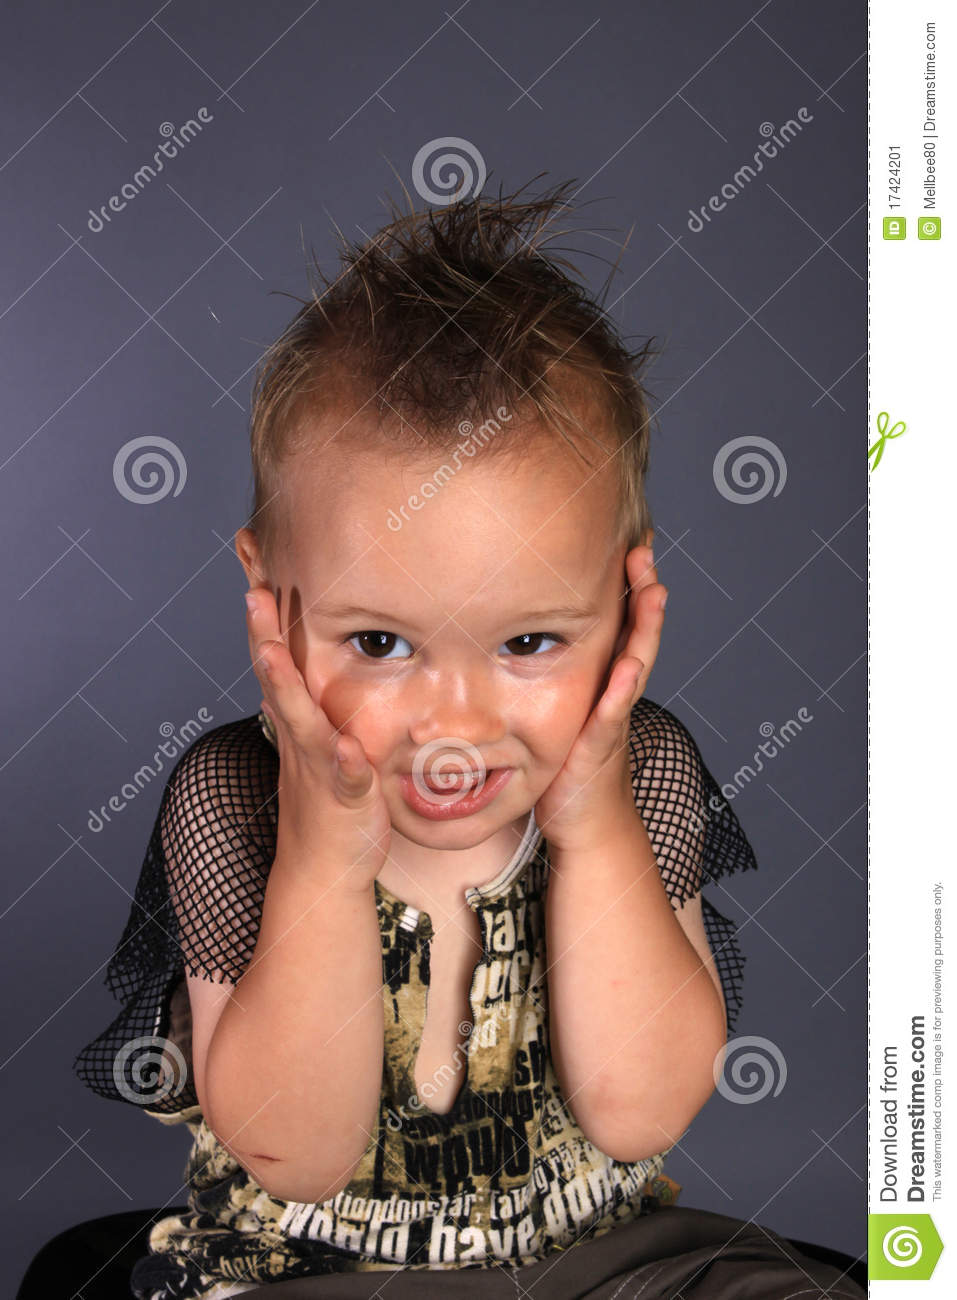 Appalled Looking Boy Stock Image   Image  17424201